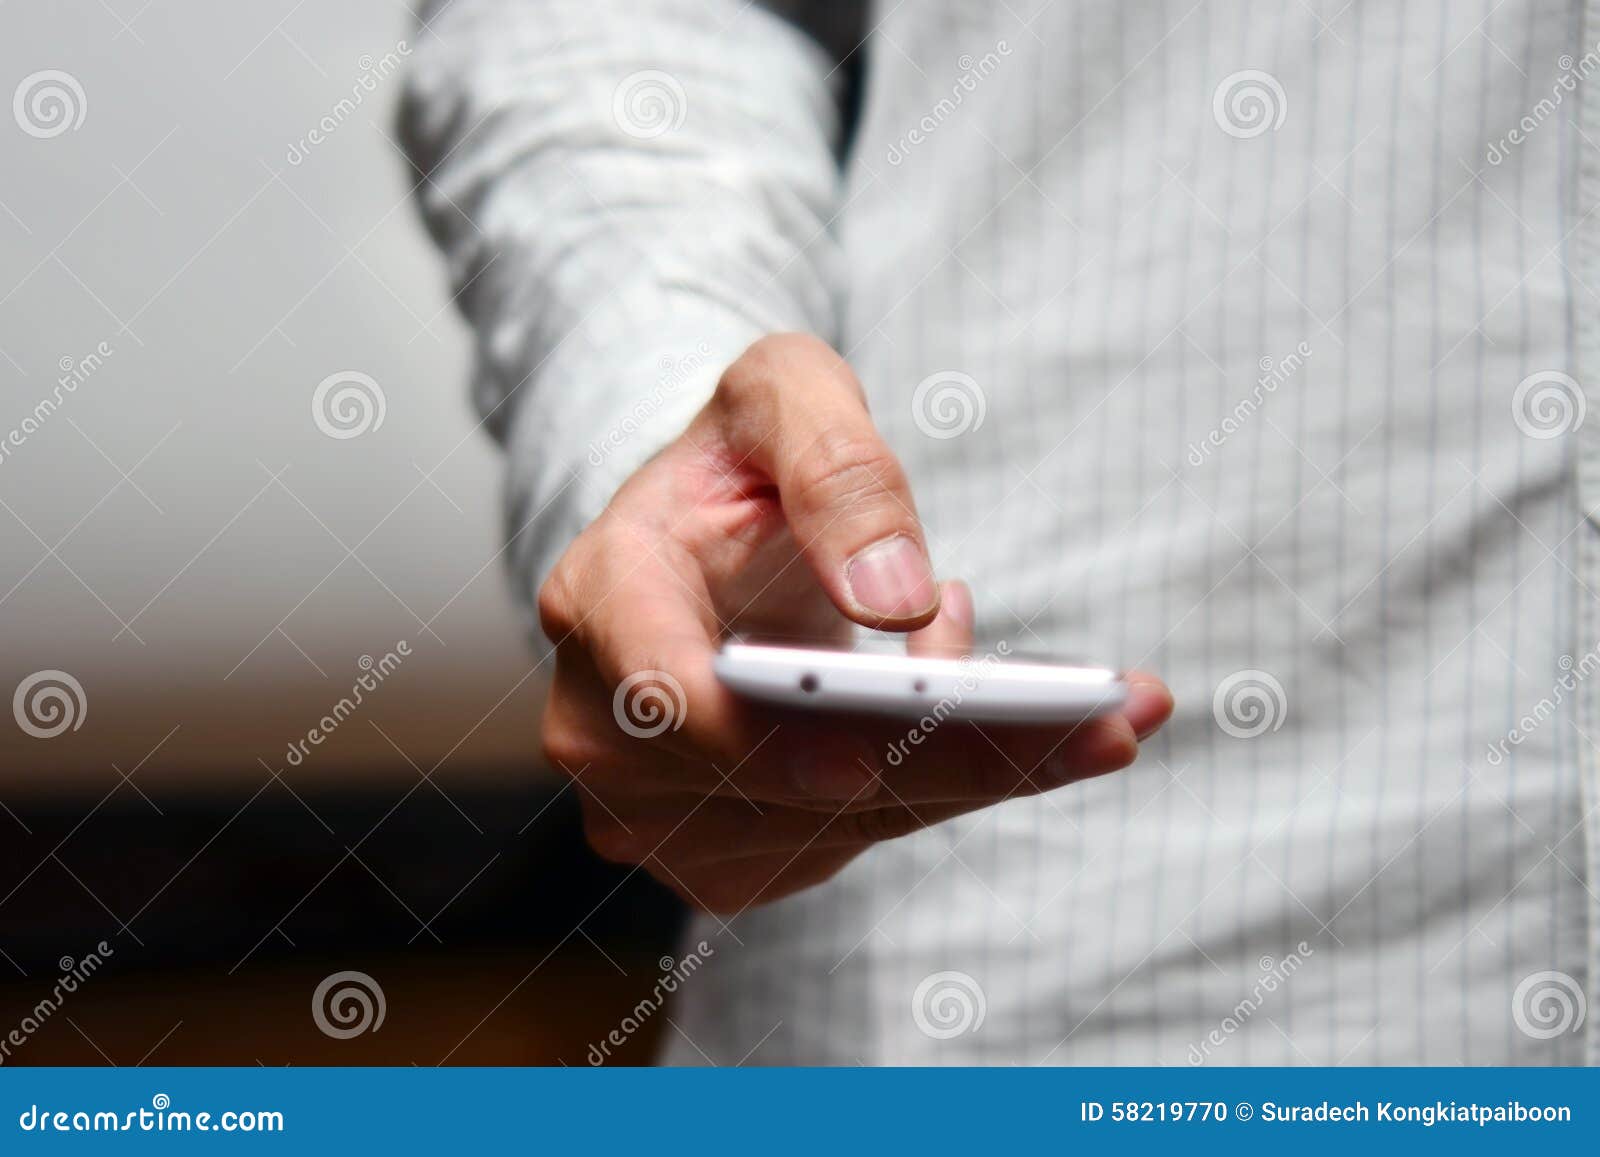 Hand holding cell phone stock photo. Image of computer - 58219770